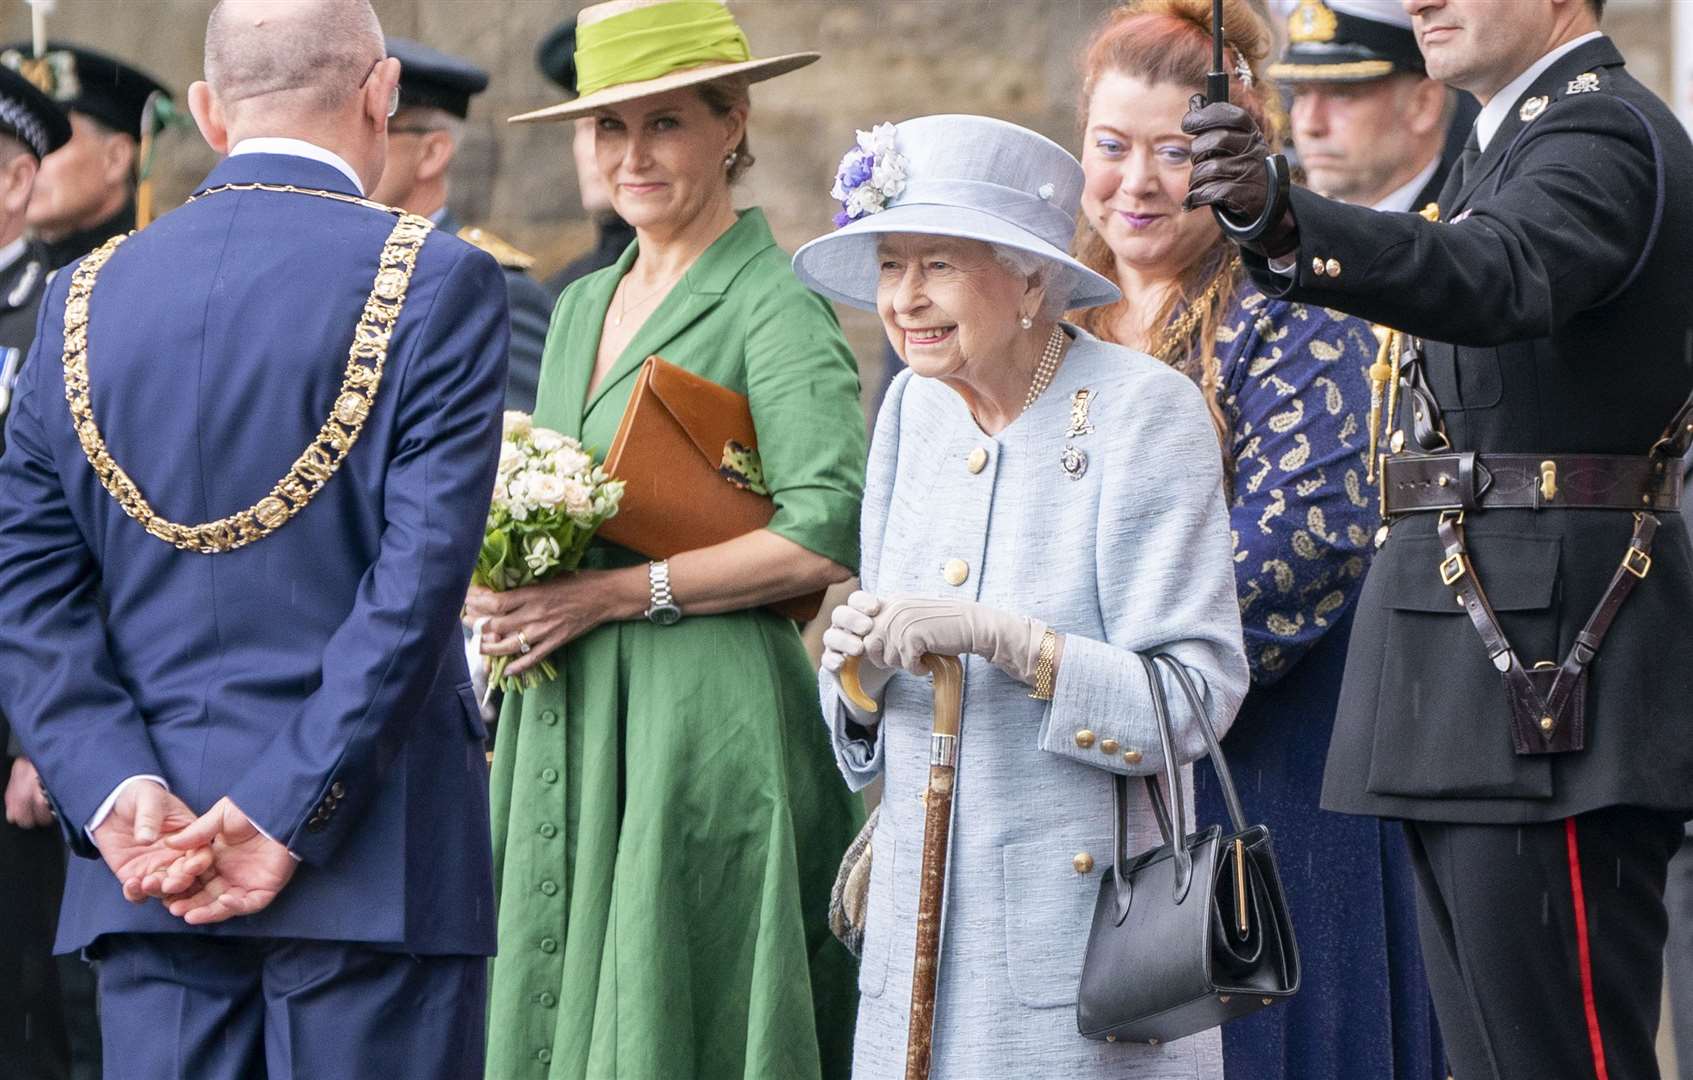 The Queen attending the Ceremony of the Keys on the forecourt of the Palace of Holyroodhouse in Edinburgh (Jane Barlow/PA)